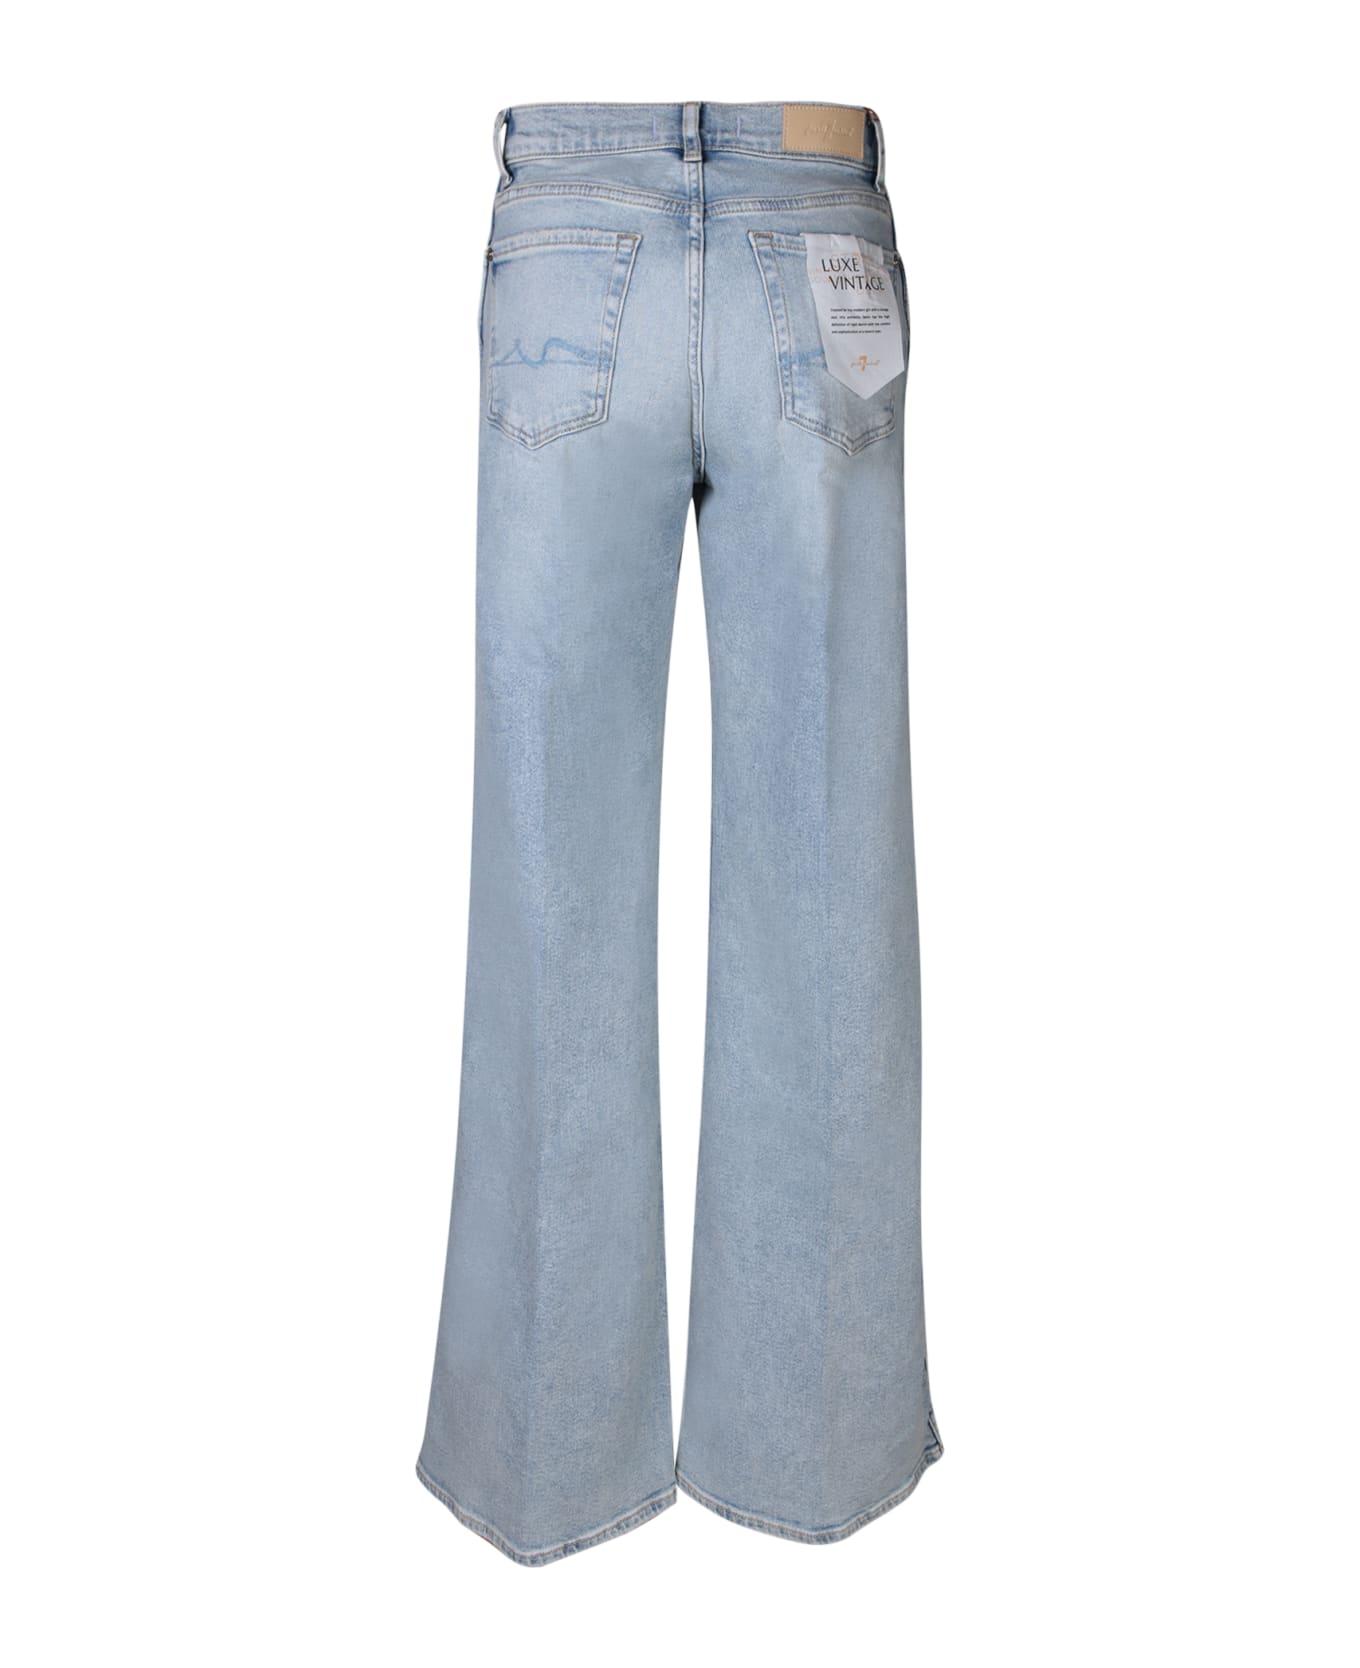 7 For All Mankind Lotta Light Blue Jeans - Blue